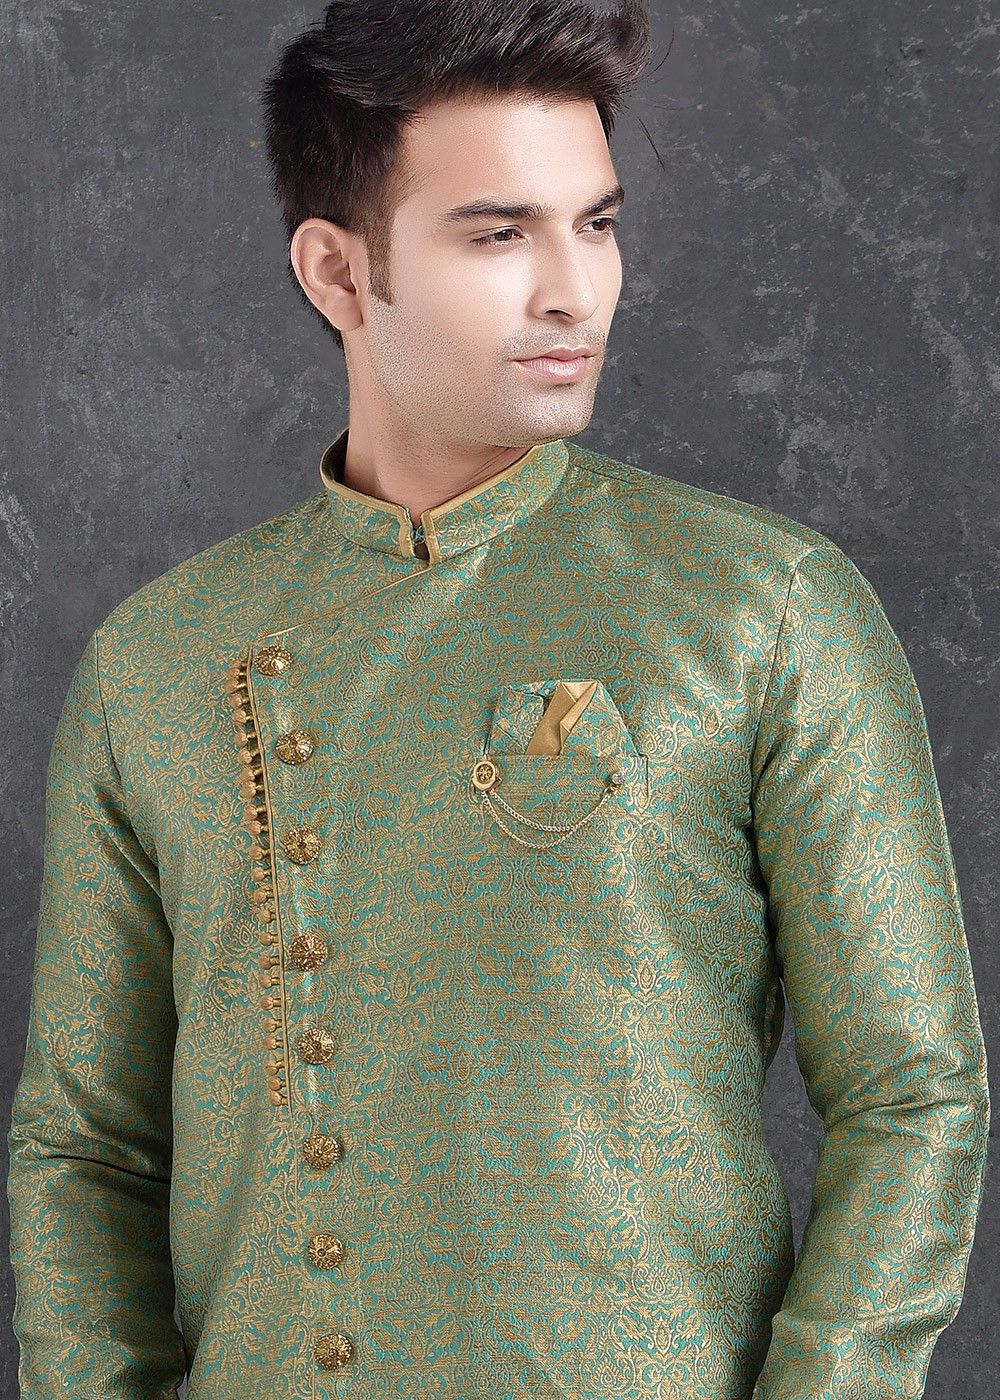 Baby Peach Color Indian Wedding IndoWestern Sherwani for Men RK1203   Saris and Things